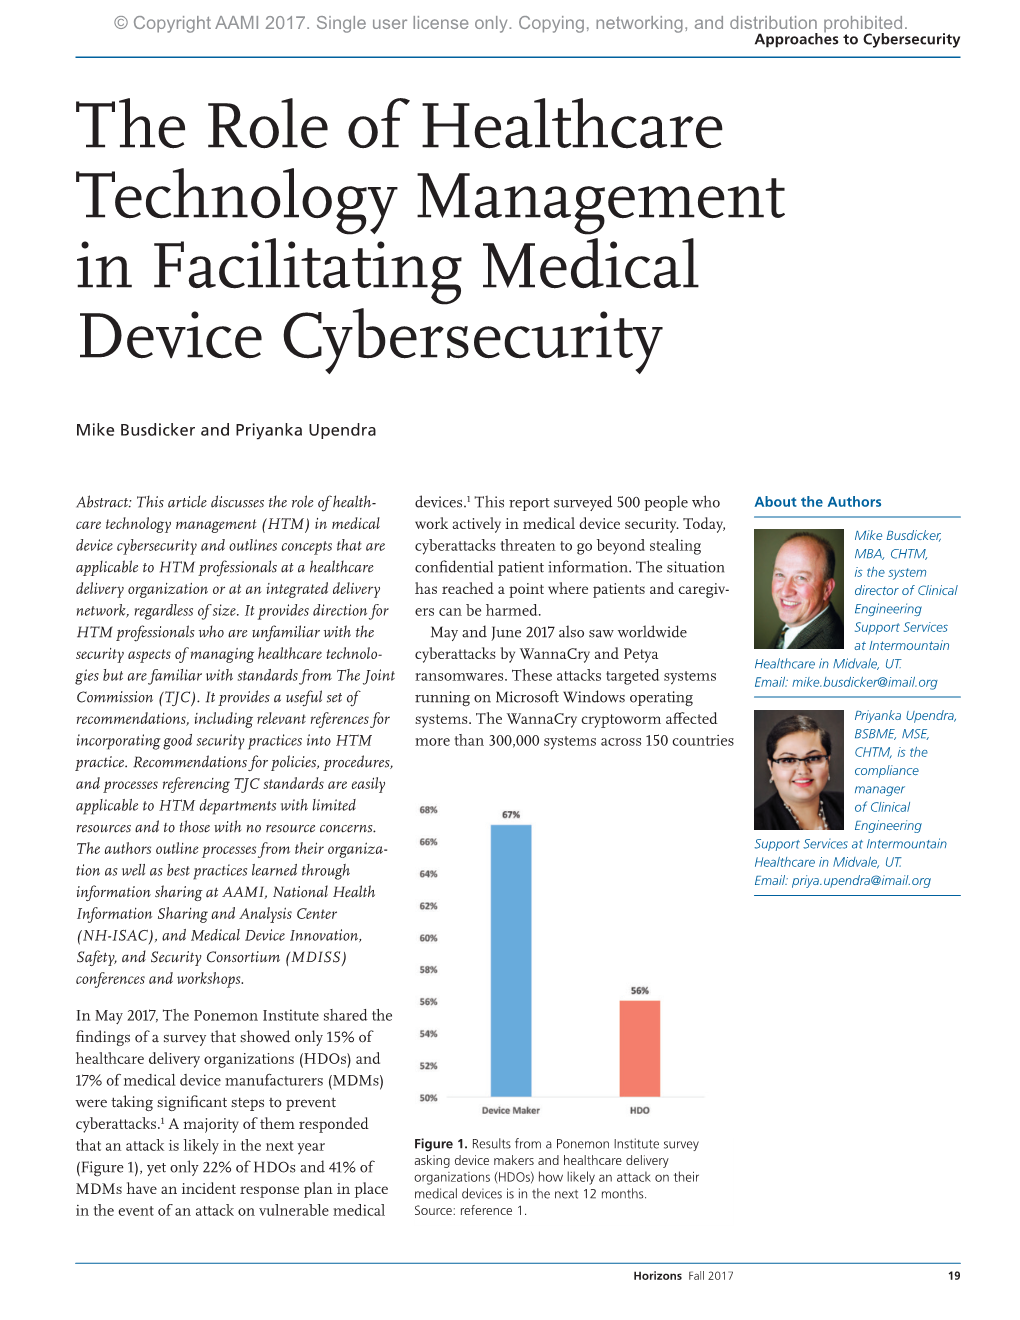 The Role of Healthcare Technology Management in Facilitating Medical Device Cybersecurity Know and Use the New! Right Symbols Mike Busdicker and Priyanka Upendra